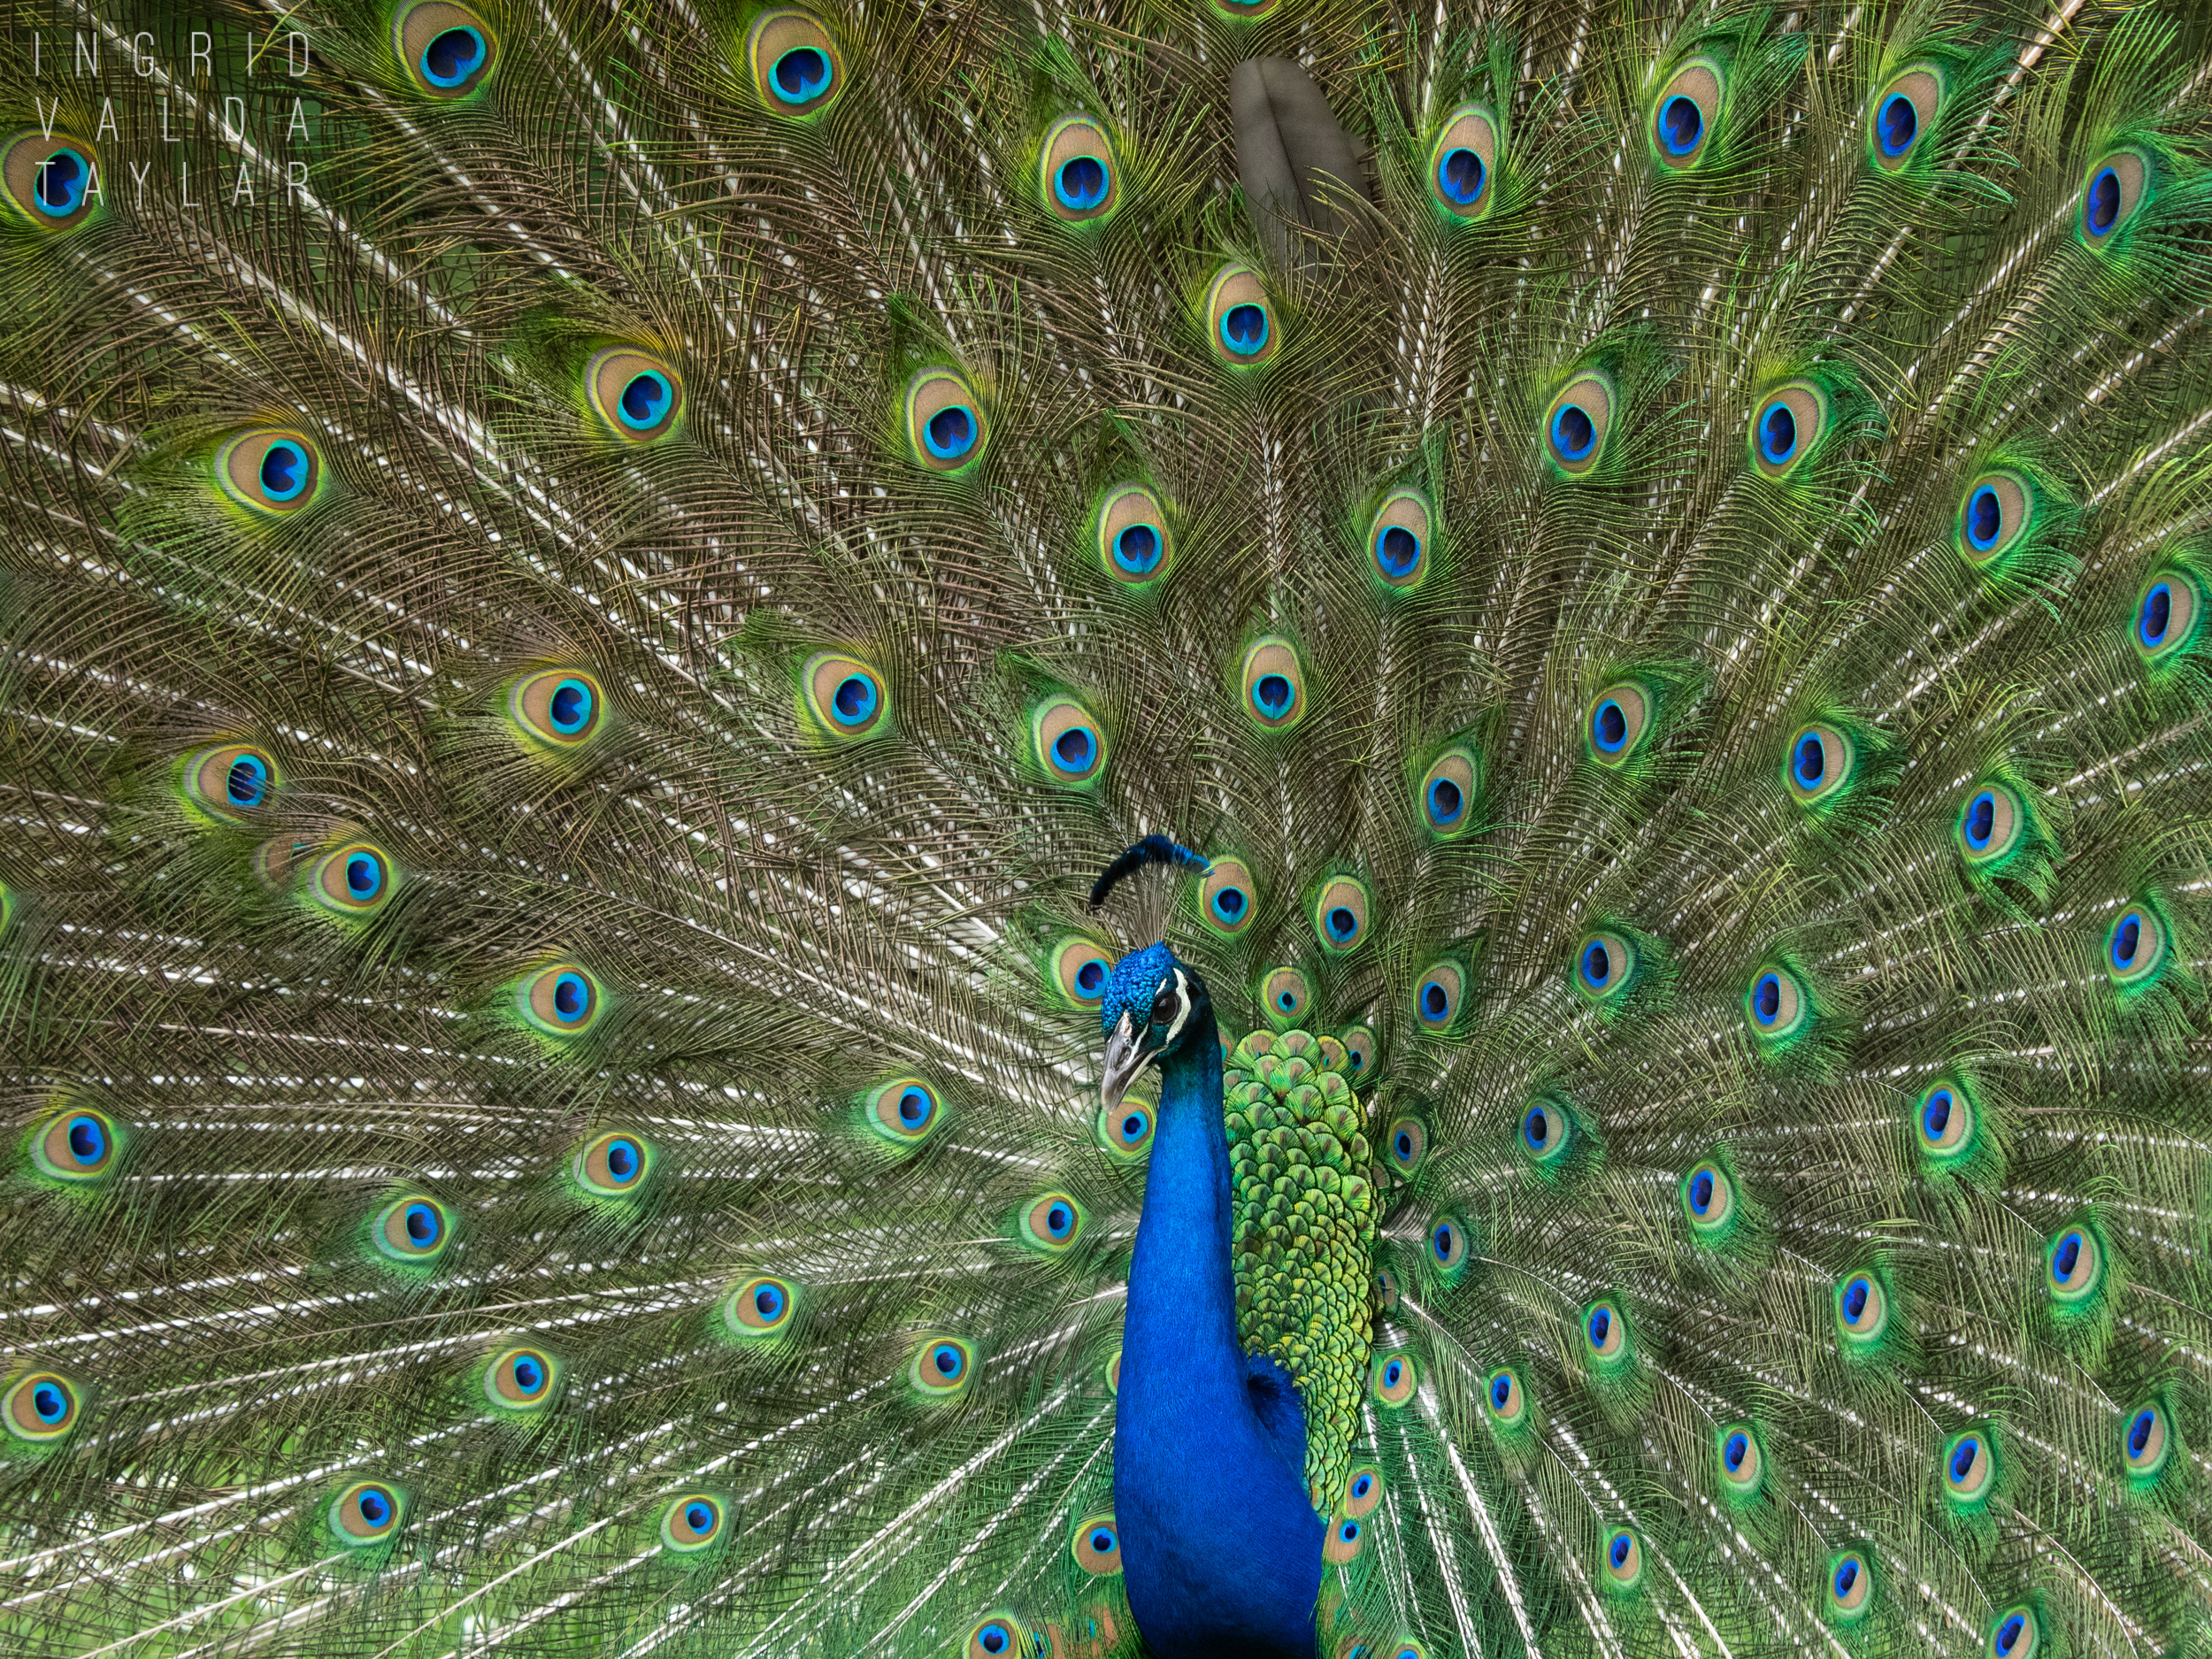 Feral Peacock with Fanned Tail